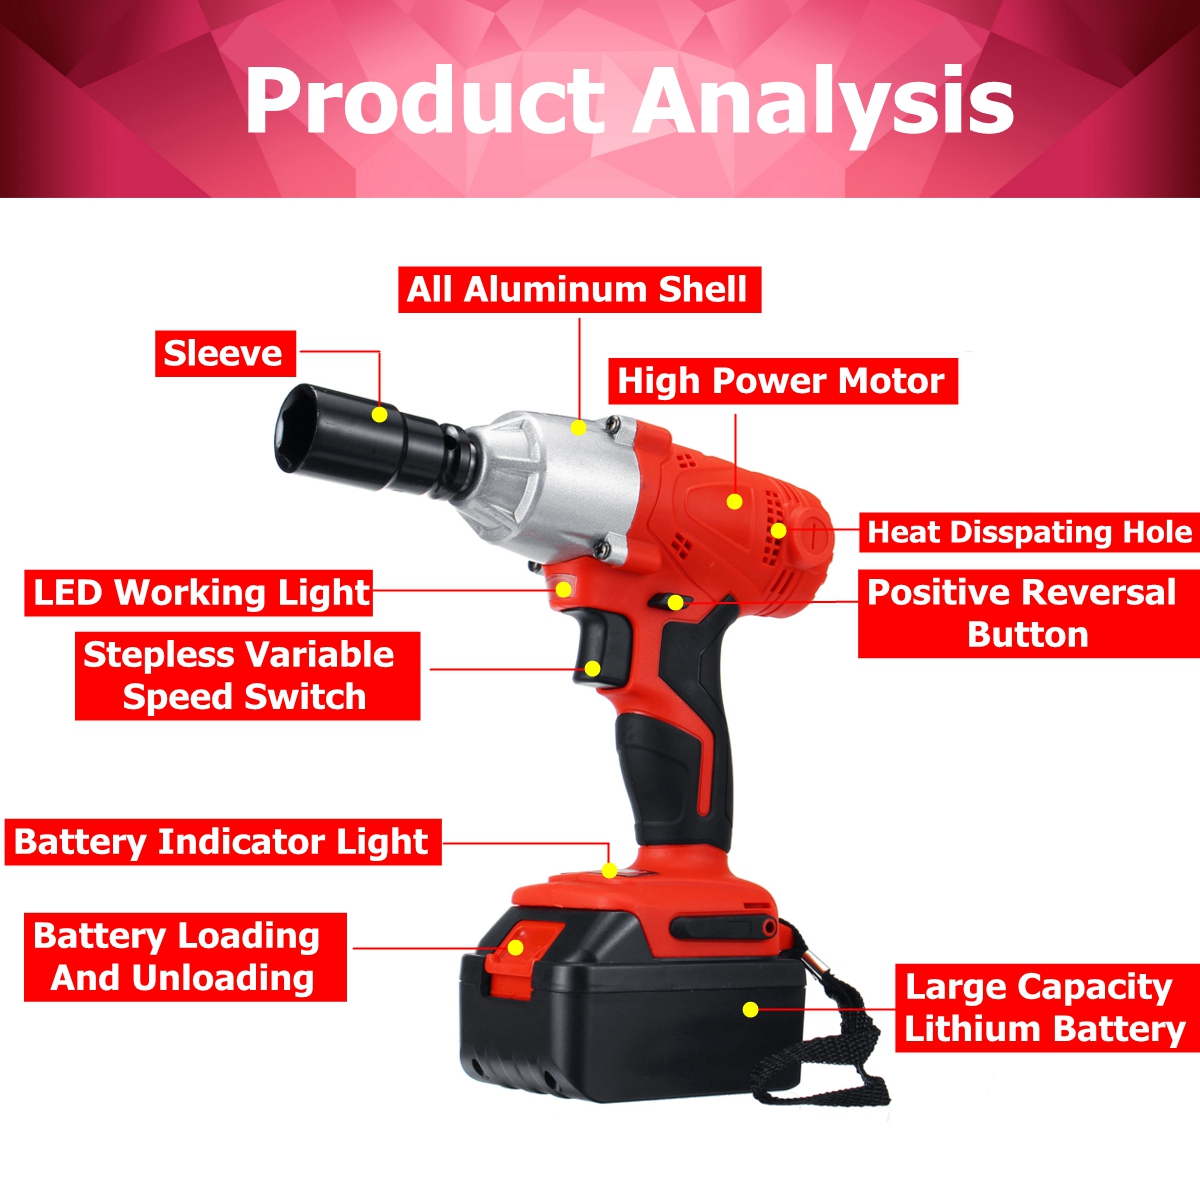 128VF188VF-Electric-Wrench-350Nm-High-Torque-Impact-Wrench-Cordless-12-Batteries-1-Charger-1431843-4